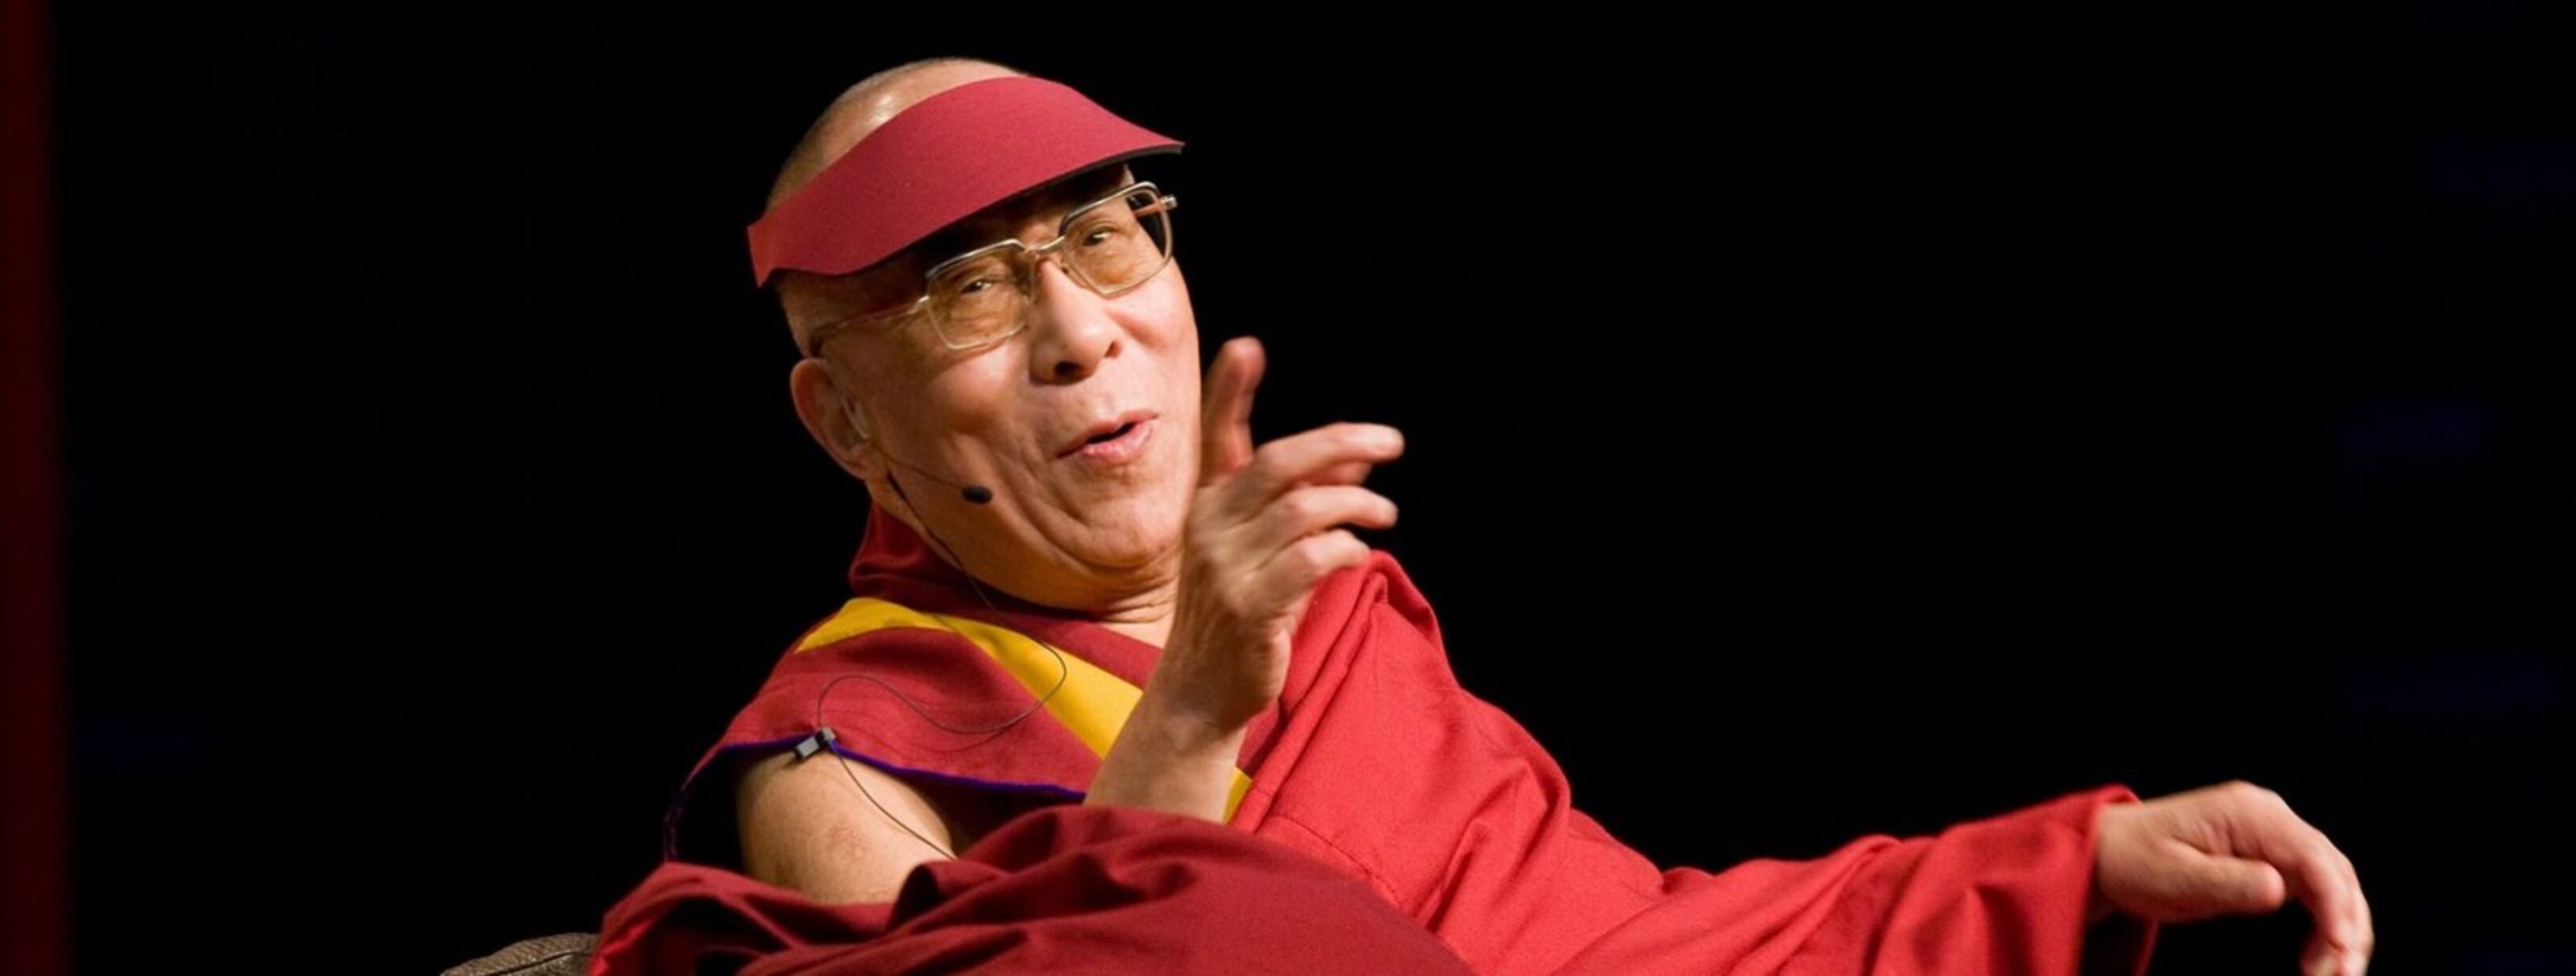 1620-Dalai_Lama_visits University of Michigan School for Environment and Sustainability from Ann Arbor_Wikimediacommons